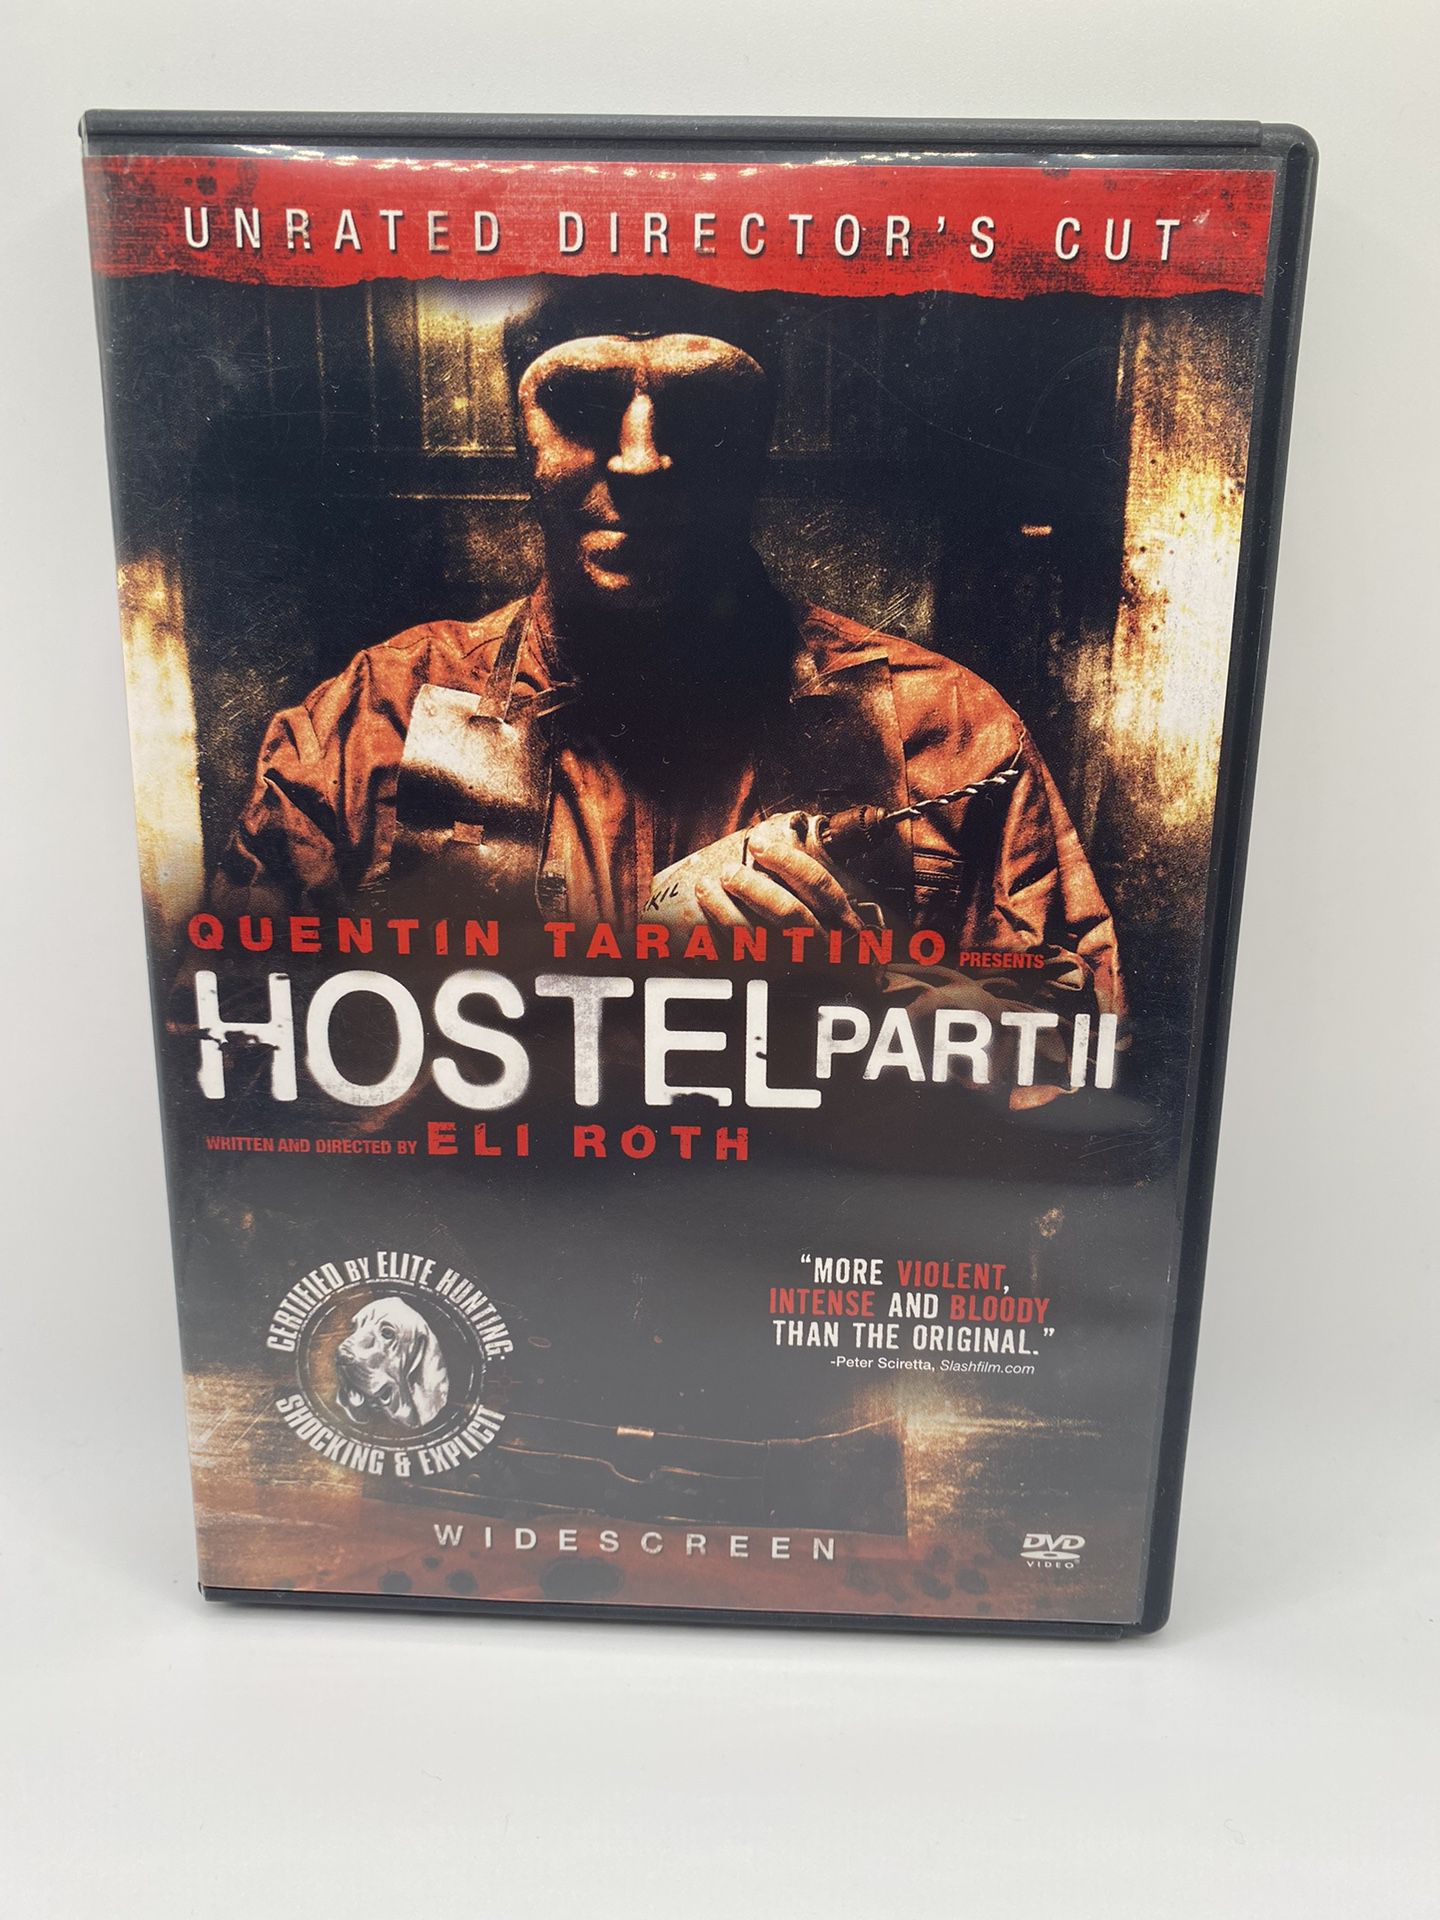 Hostel: Part II (Unrated Director's Cut) - DVD - VERY GOOD